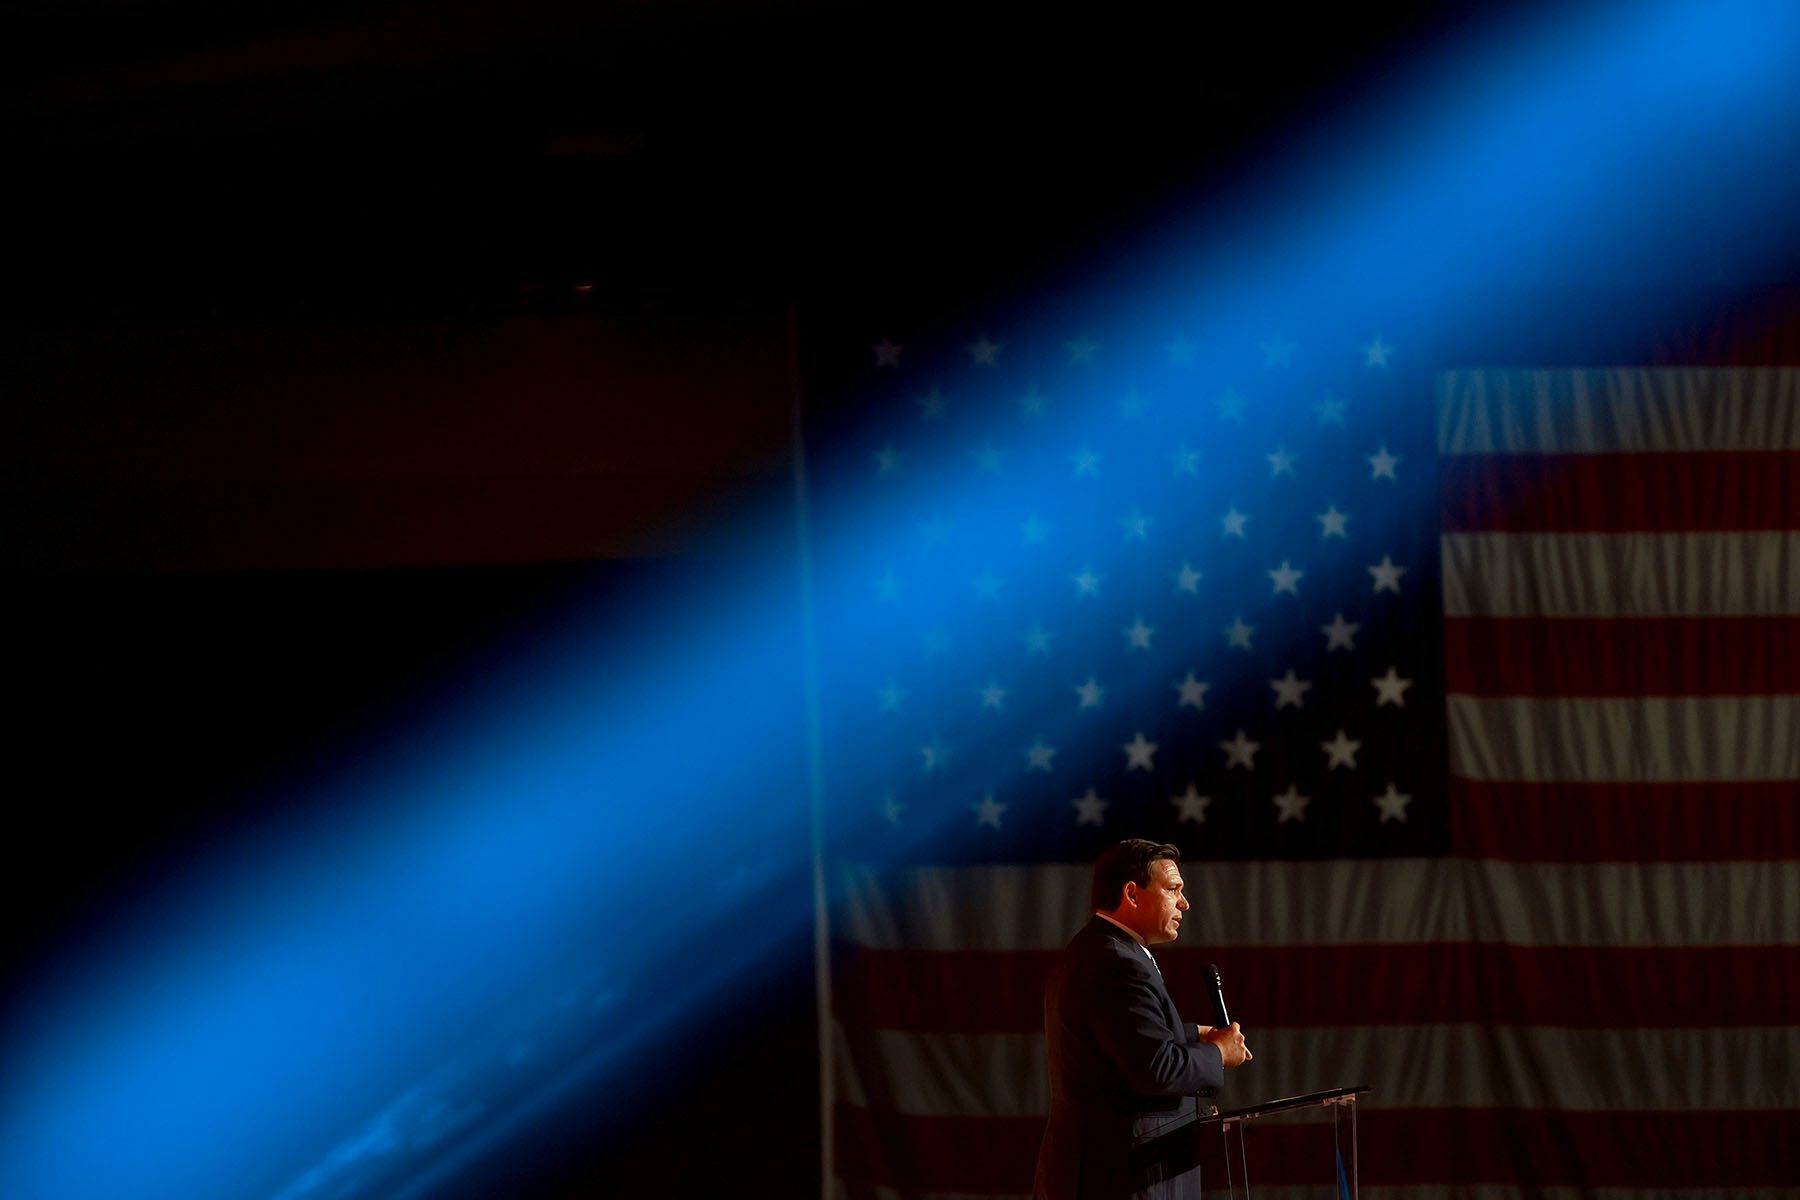 Florida Gov. Ron DeSantis speaks at a podium. A bright blue stage light passes above his head. Behind him is a large American flag.